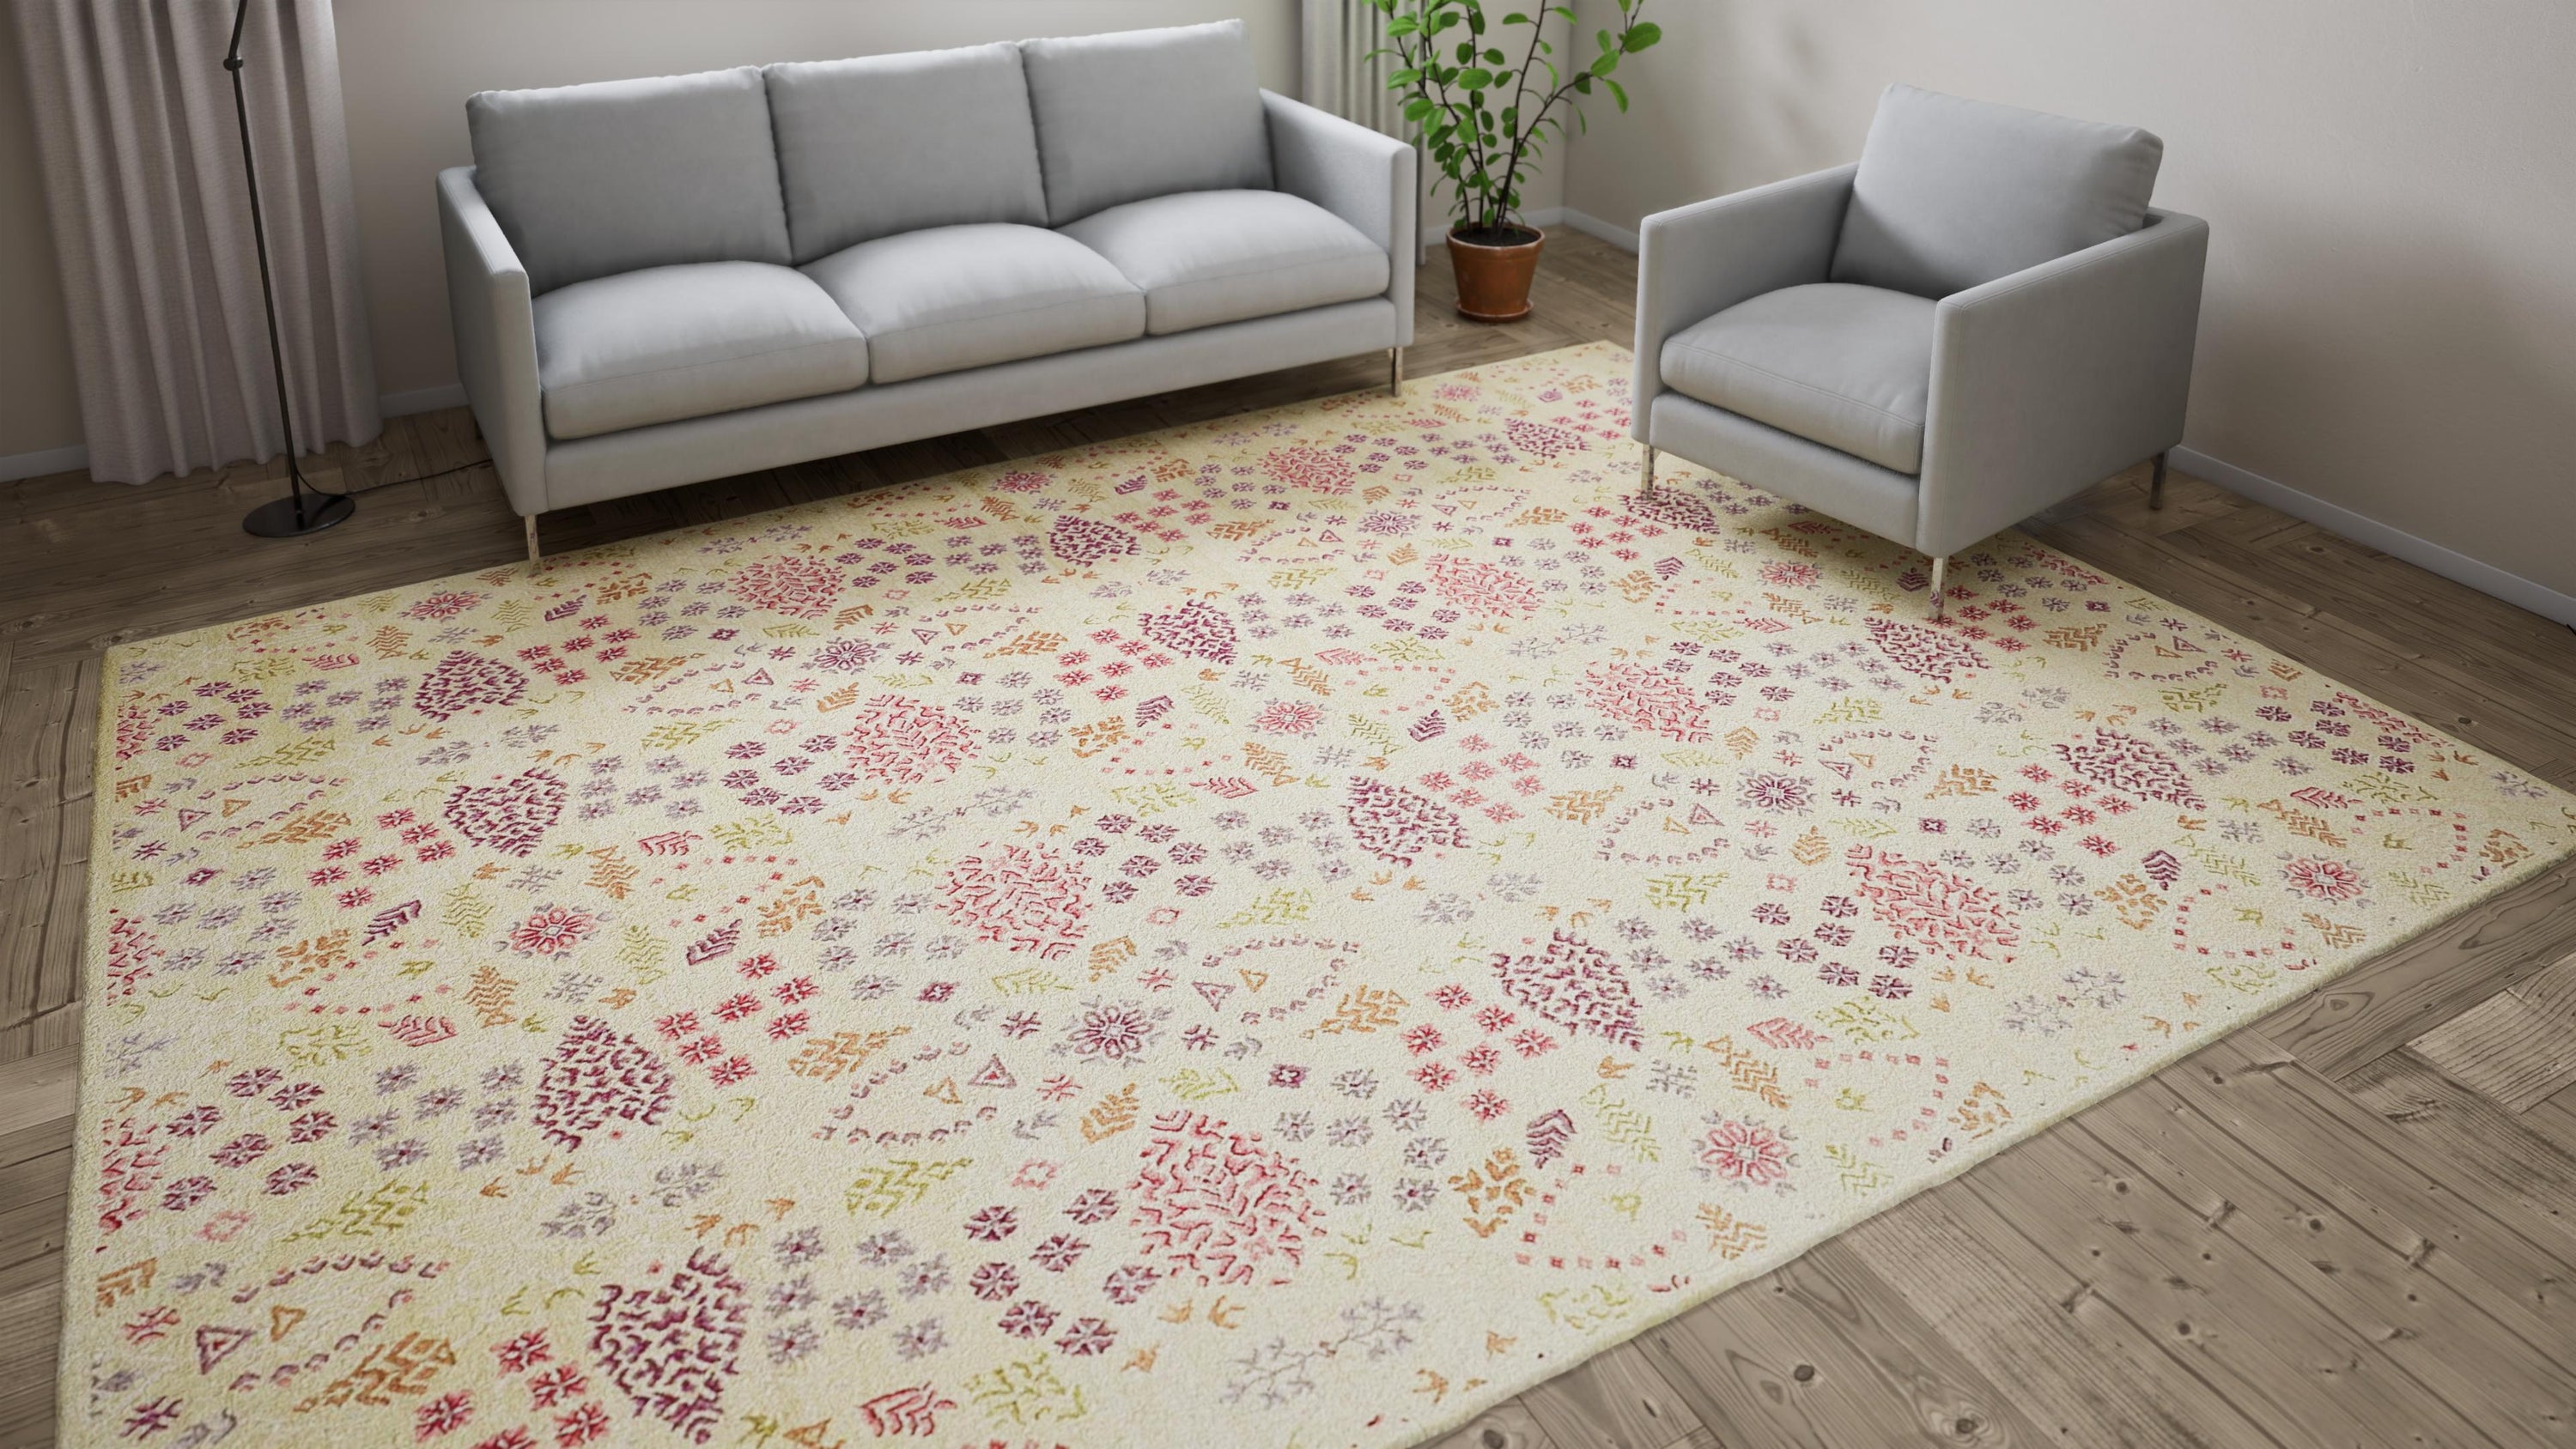 Yellow Transitional Wool Cotton Blend Rug - 9' x 12'1"